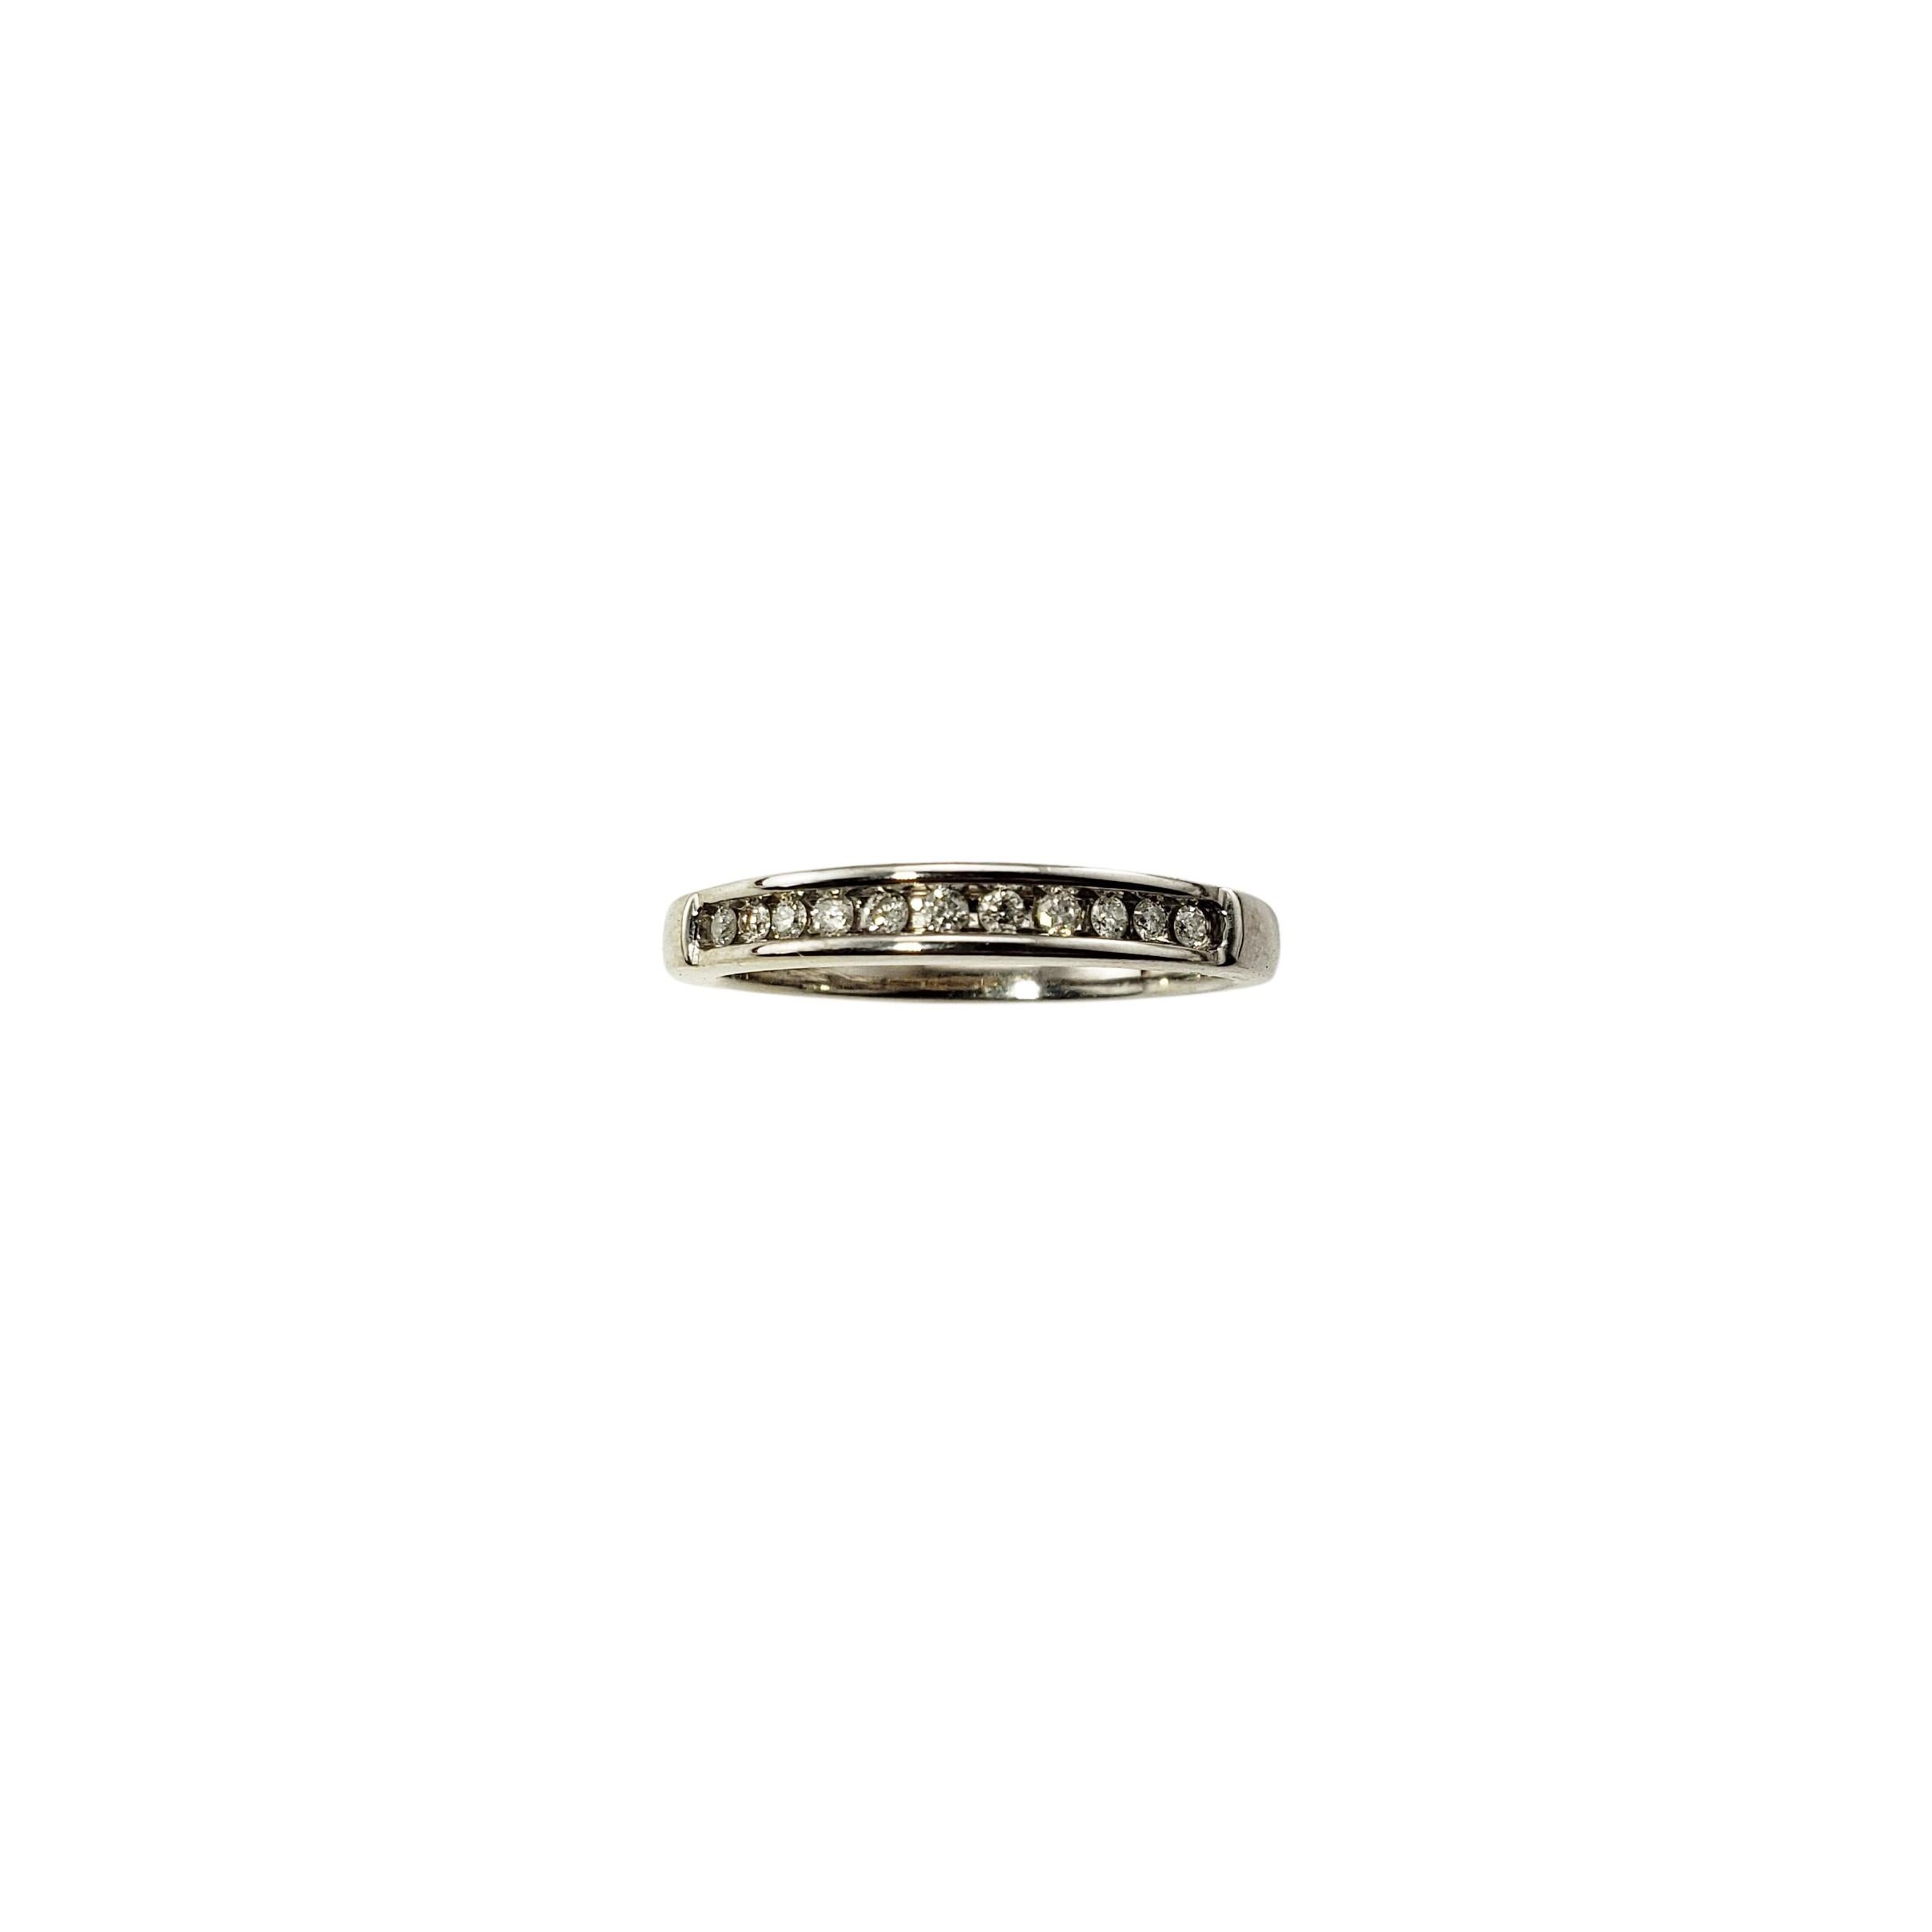 14 Karat White Gold Diamond Wedding Band Ring Size 8.5-

This sparkling wedding band features 11 round brilliant cut diamonds set in classic 14K white gold.  Width:  3 mm.  Shank:  2 mm.

Approximate total diamond weight:  .22 ct.

Diamond color: